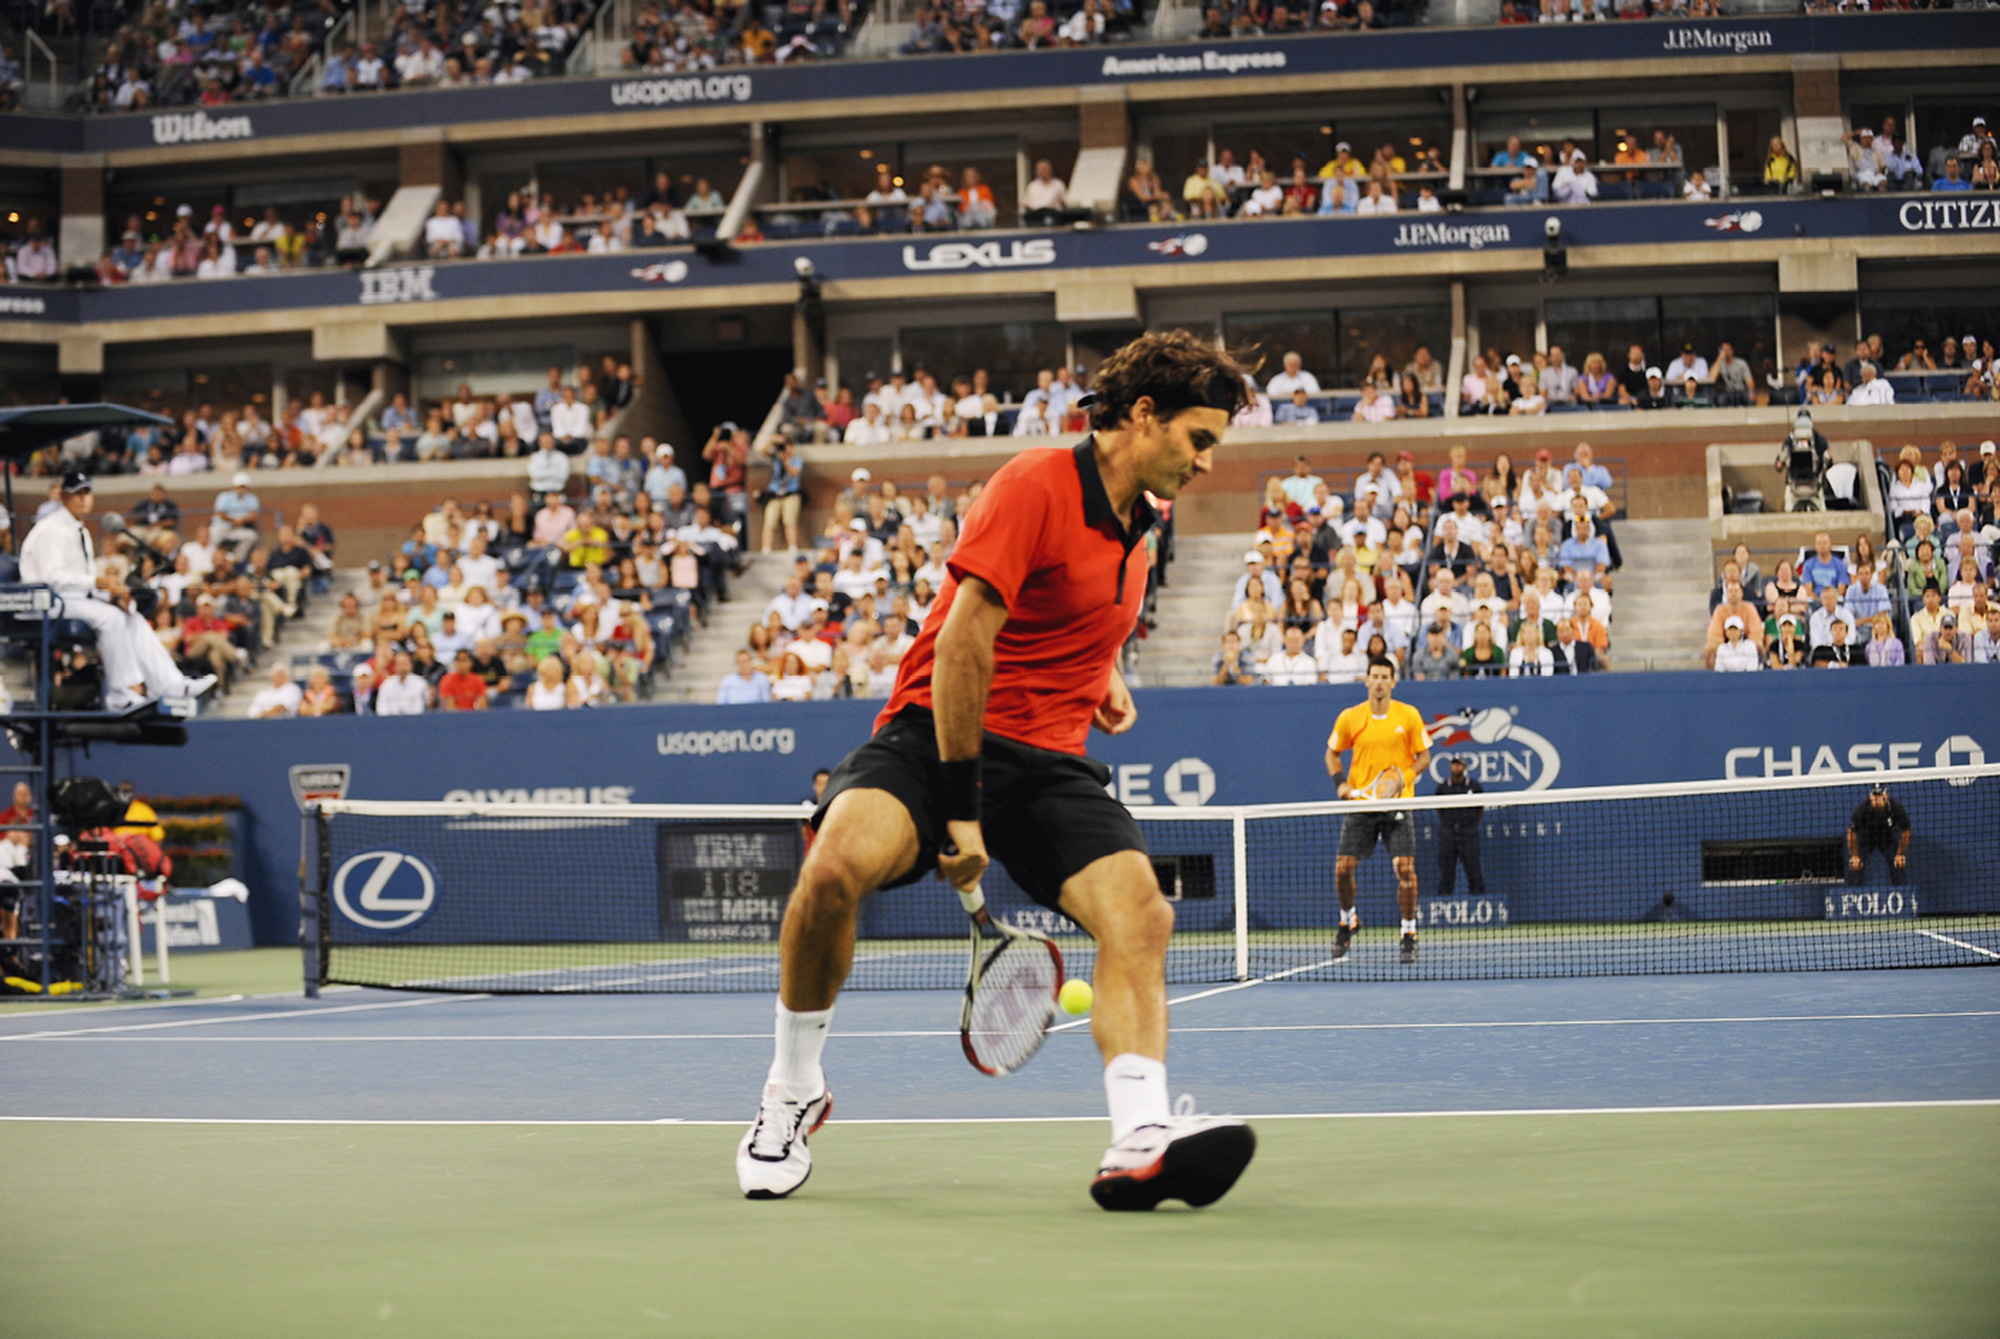 A photograph of Federer’s unorthodox groundstroke against Novak Djokovic at the two thousand and nine US Open.